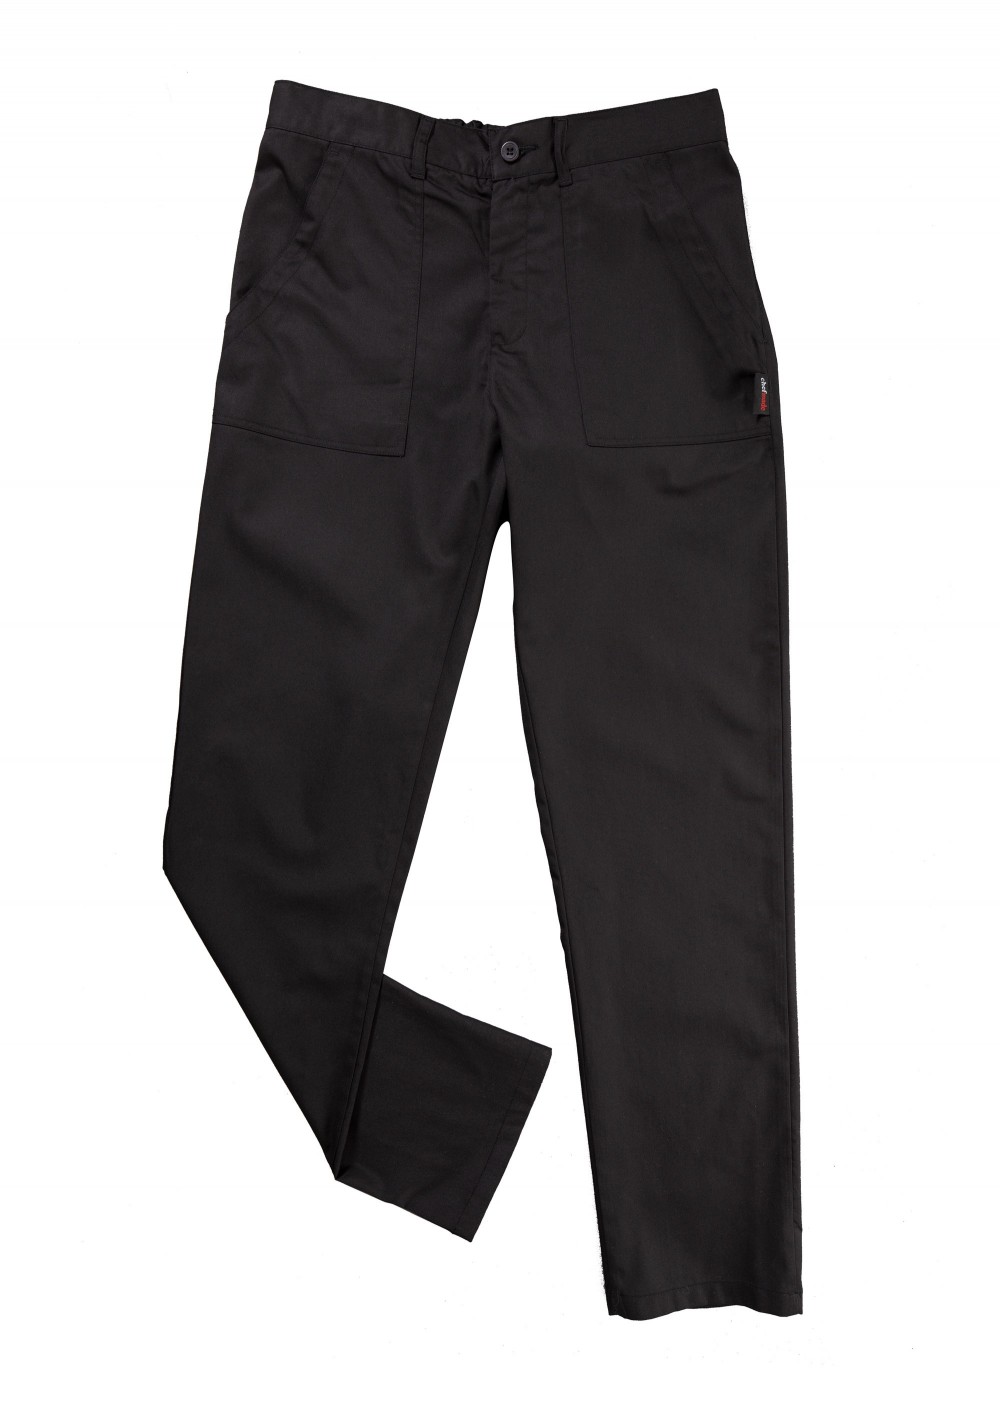 Men's Chef Trousers | Men's Chef Pants in Black with Patch Pockets ...